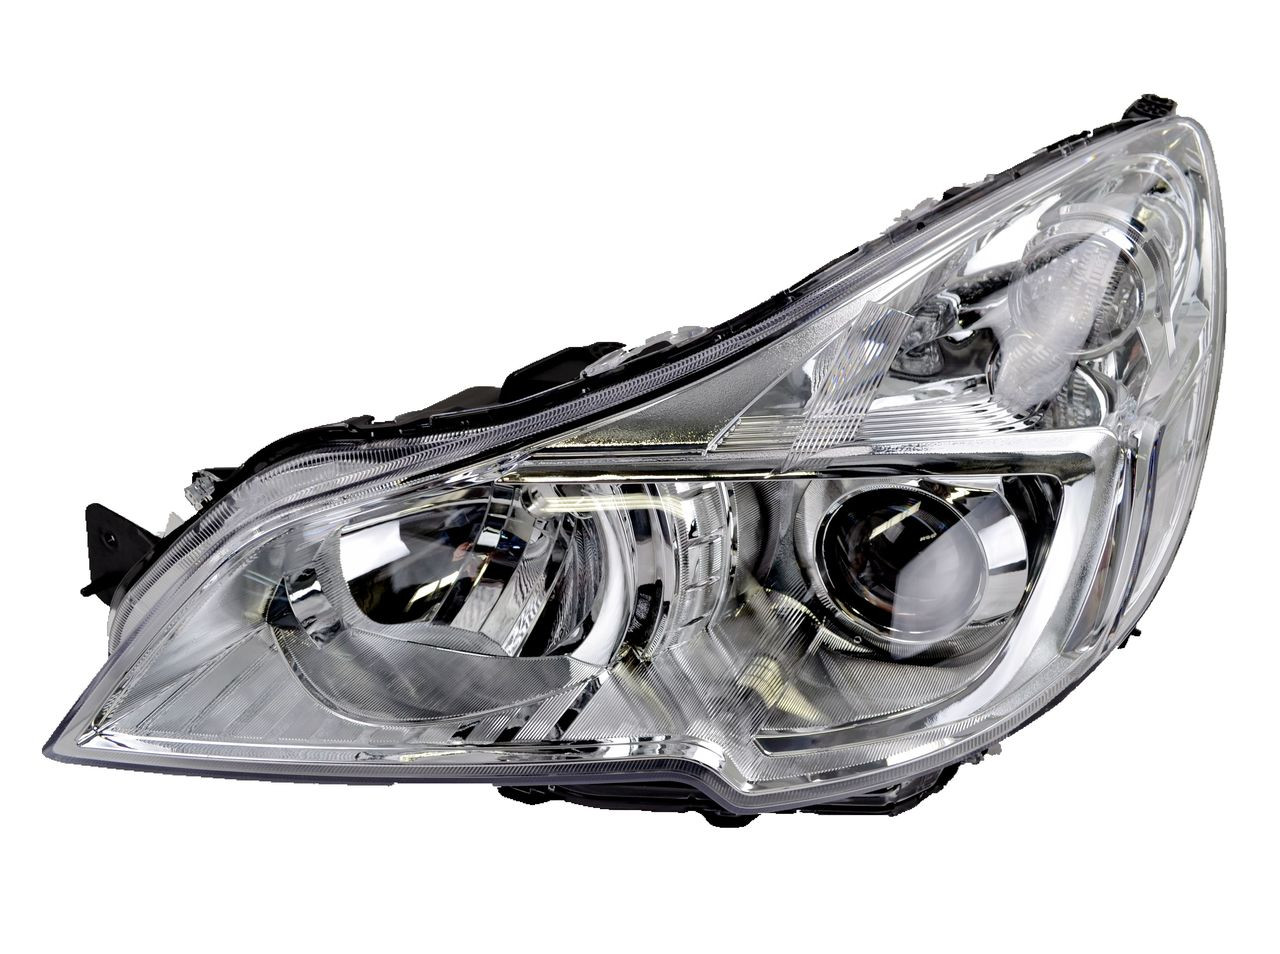 Headlight for Subaru Outback/Liberty 01/13-11/14 New Left Front Lamp XENON TYPE